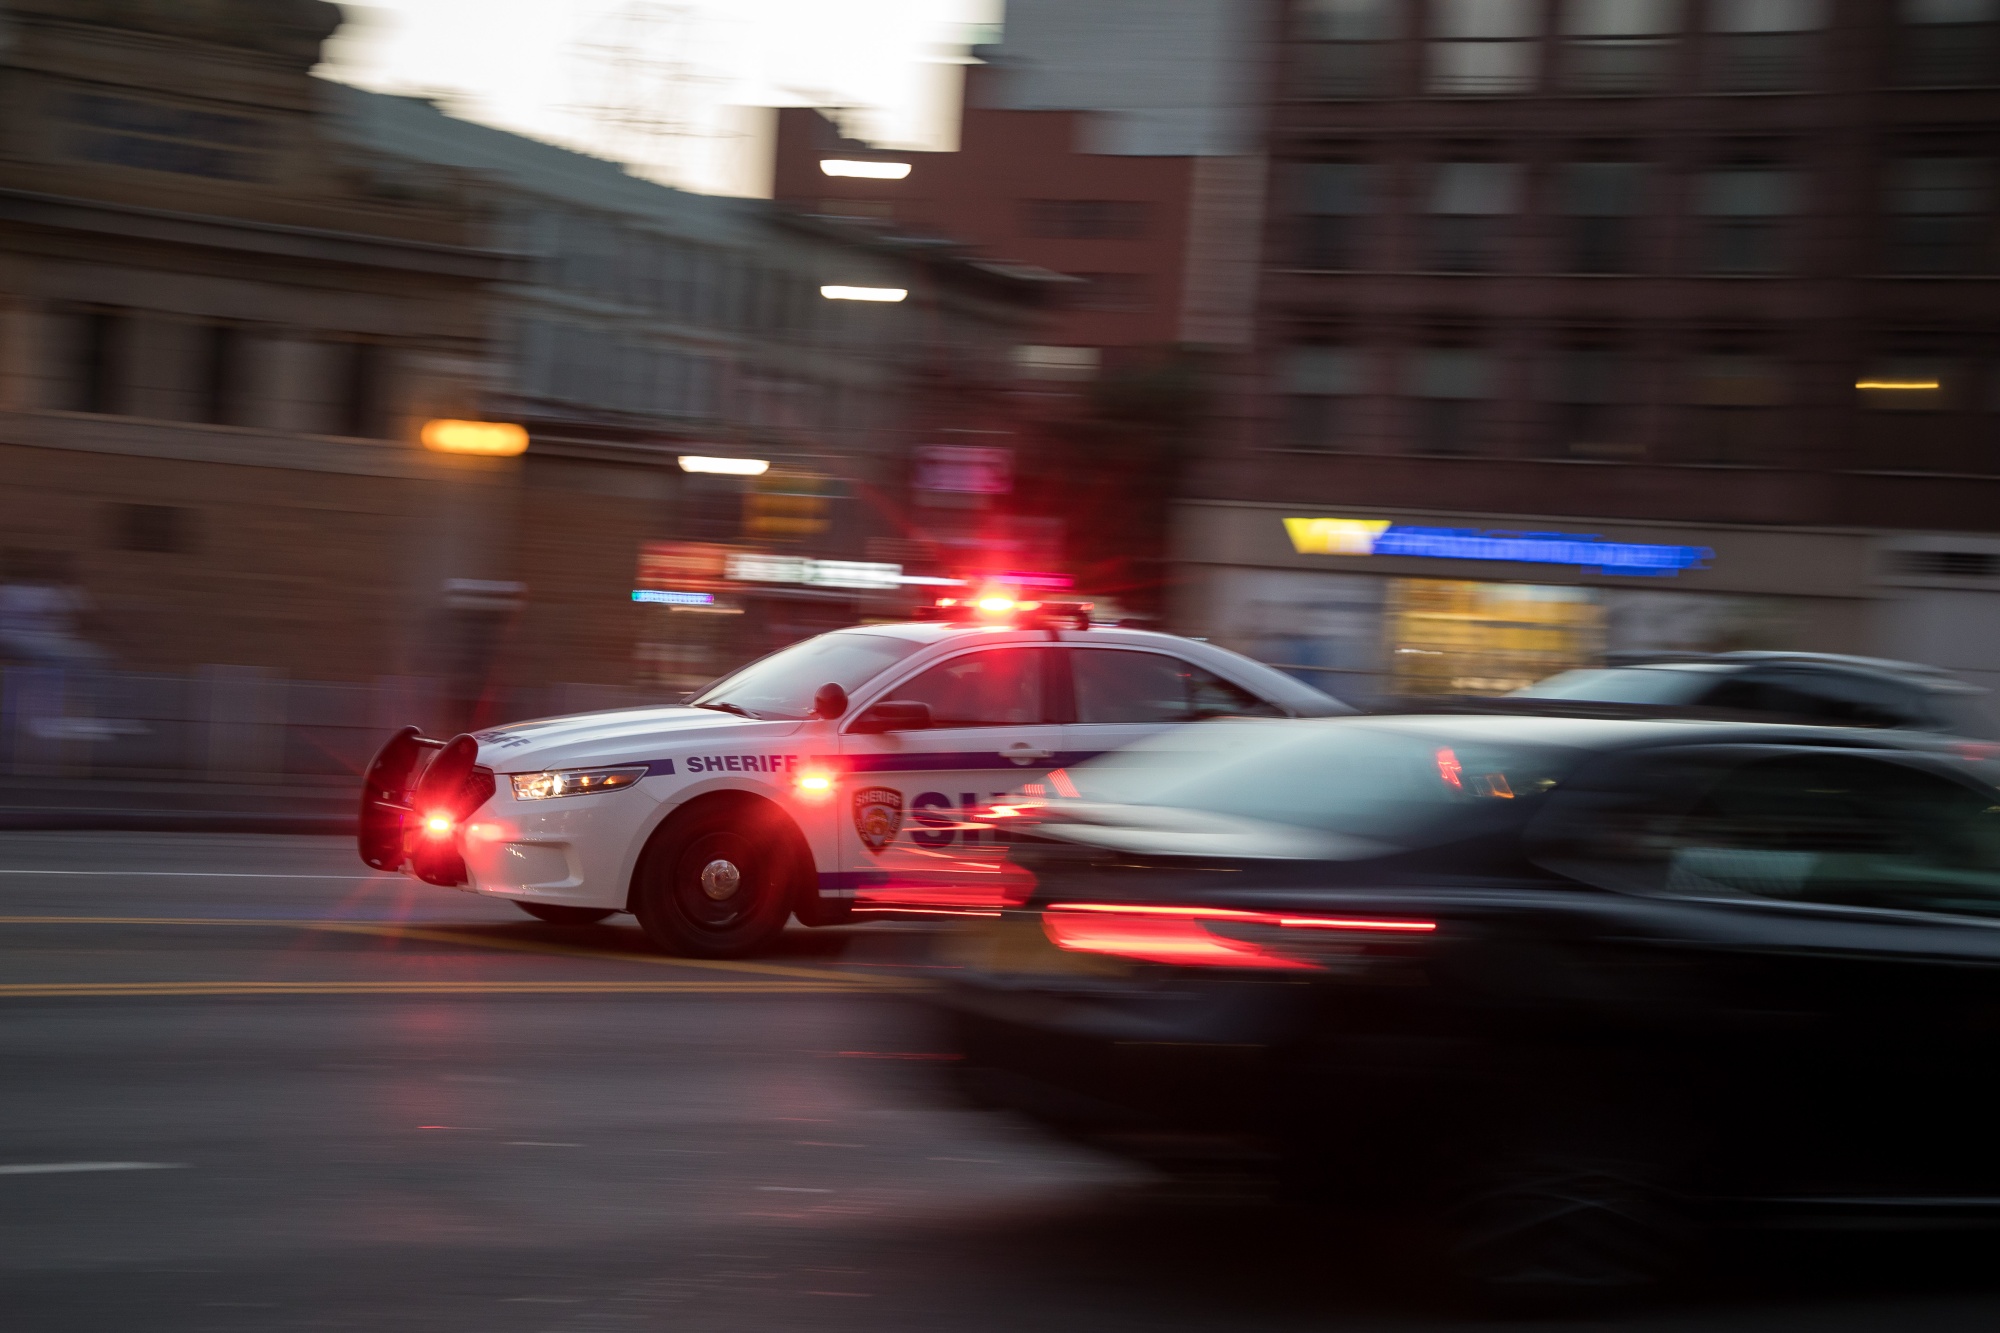 A New York Sheriff's vehicle responds to a call in the Brooklyn borough of New York, U.S.